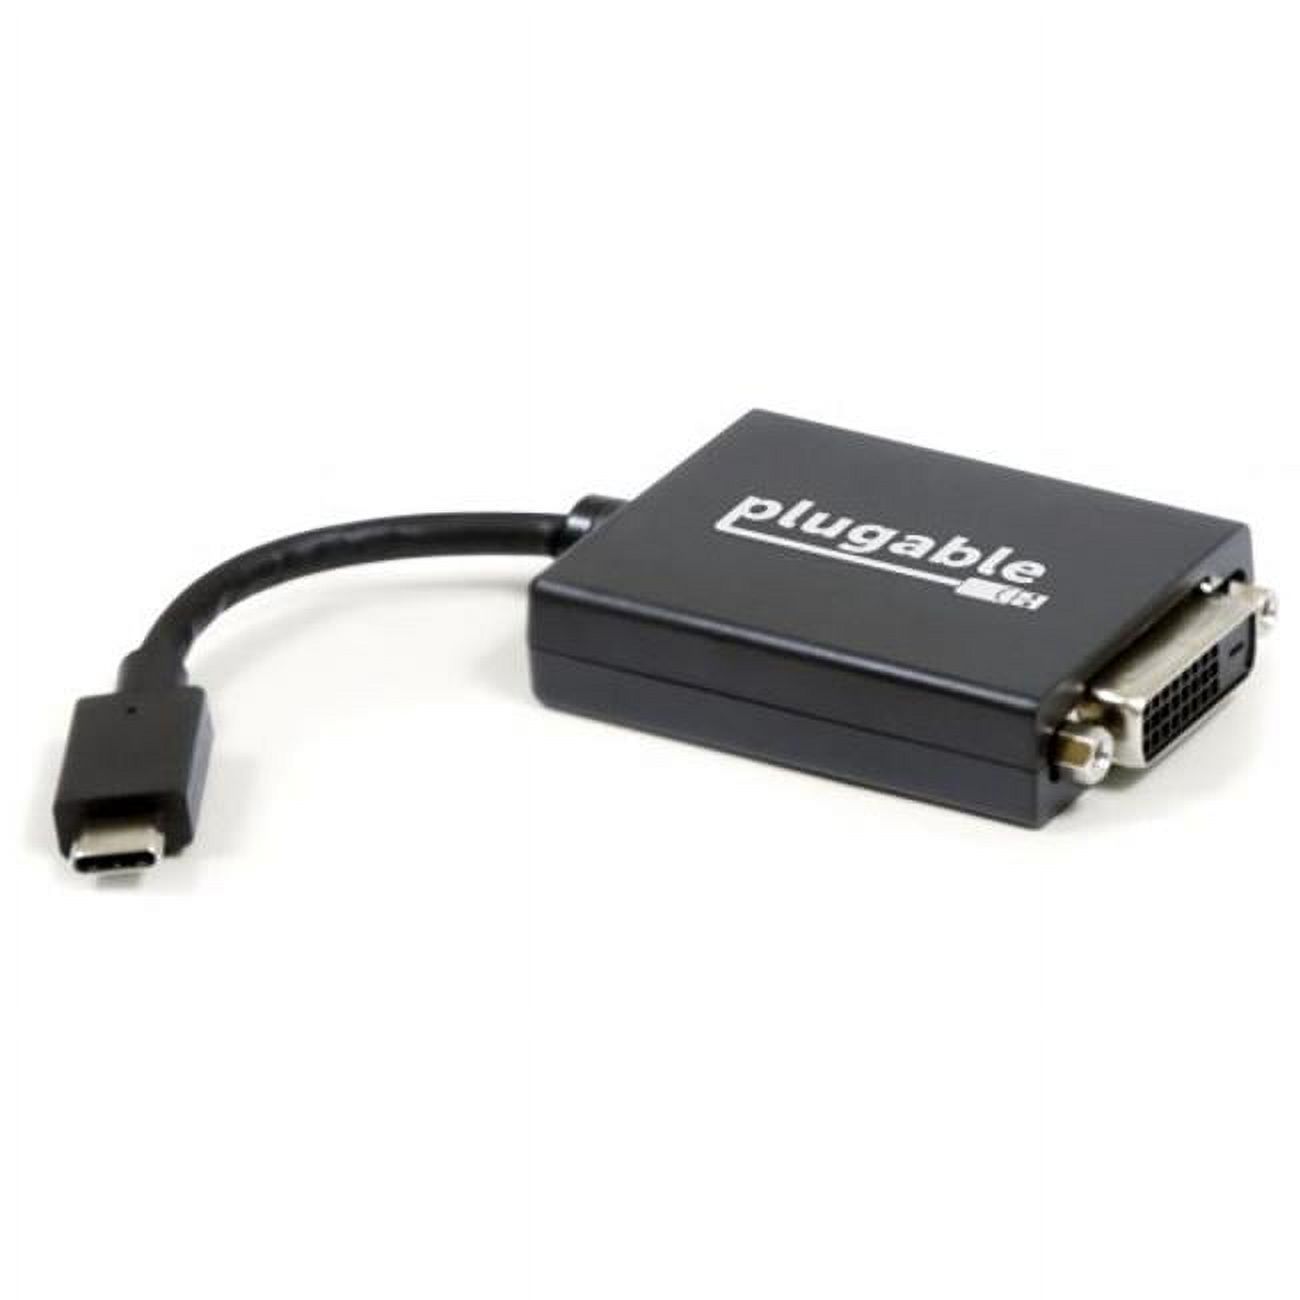 Plugable USB C to DVI Adapter - Connect Your USB-C Laptop to a DVI Display up to 1920x1200 - Compatible with 2017 and later Mac and Windows PCs - image 1 of 5